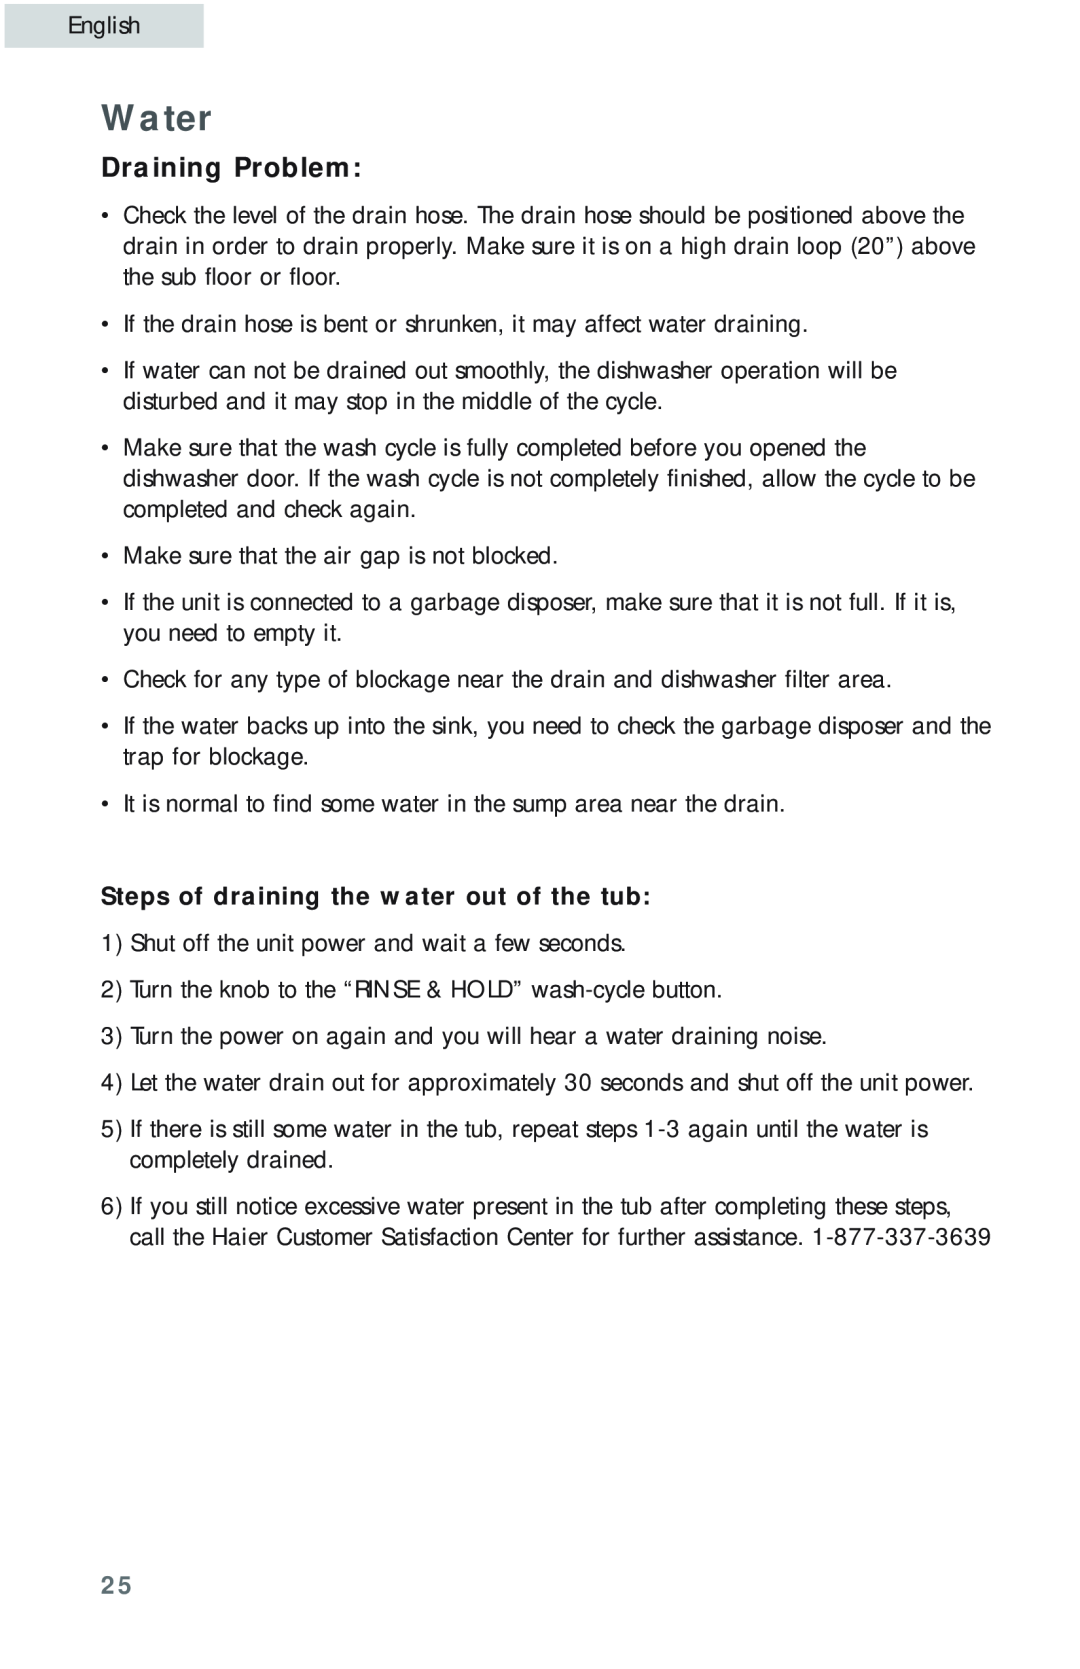 Haier HDB18EB user manual Water, Draining Problem, Steps of draining the water out of the tub 